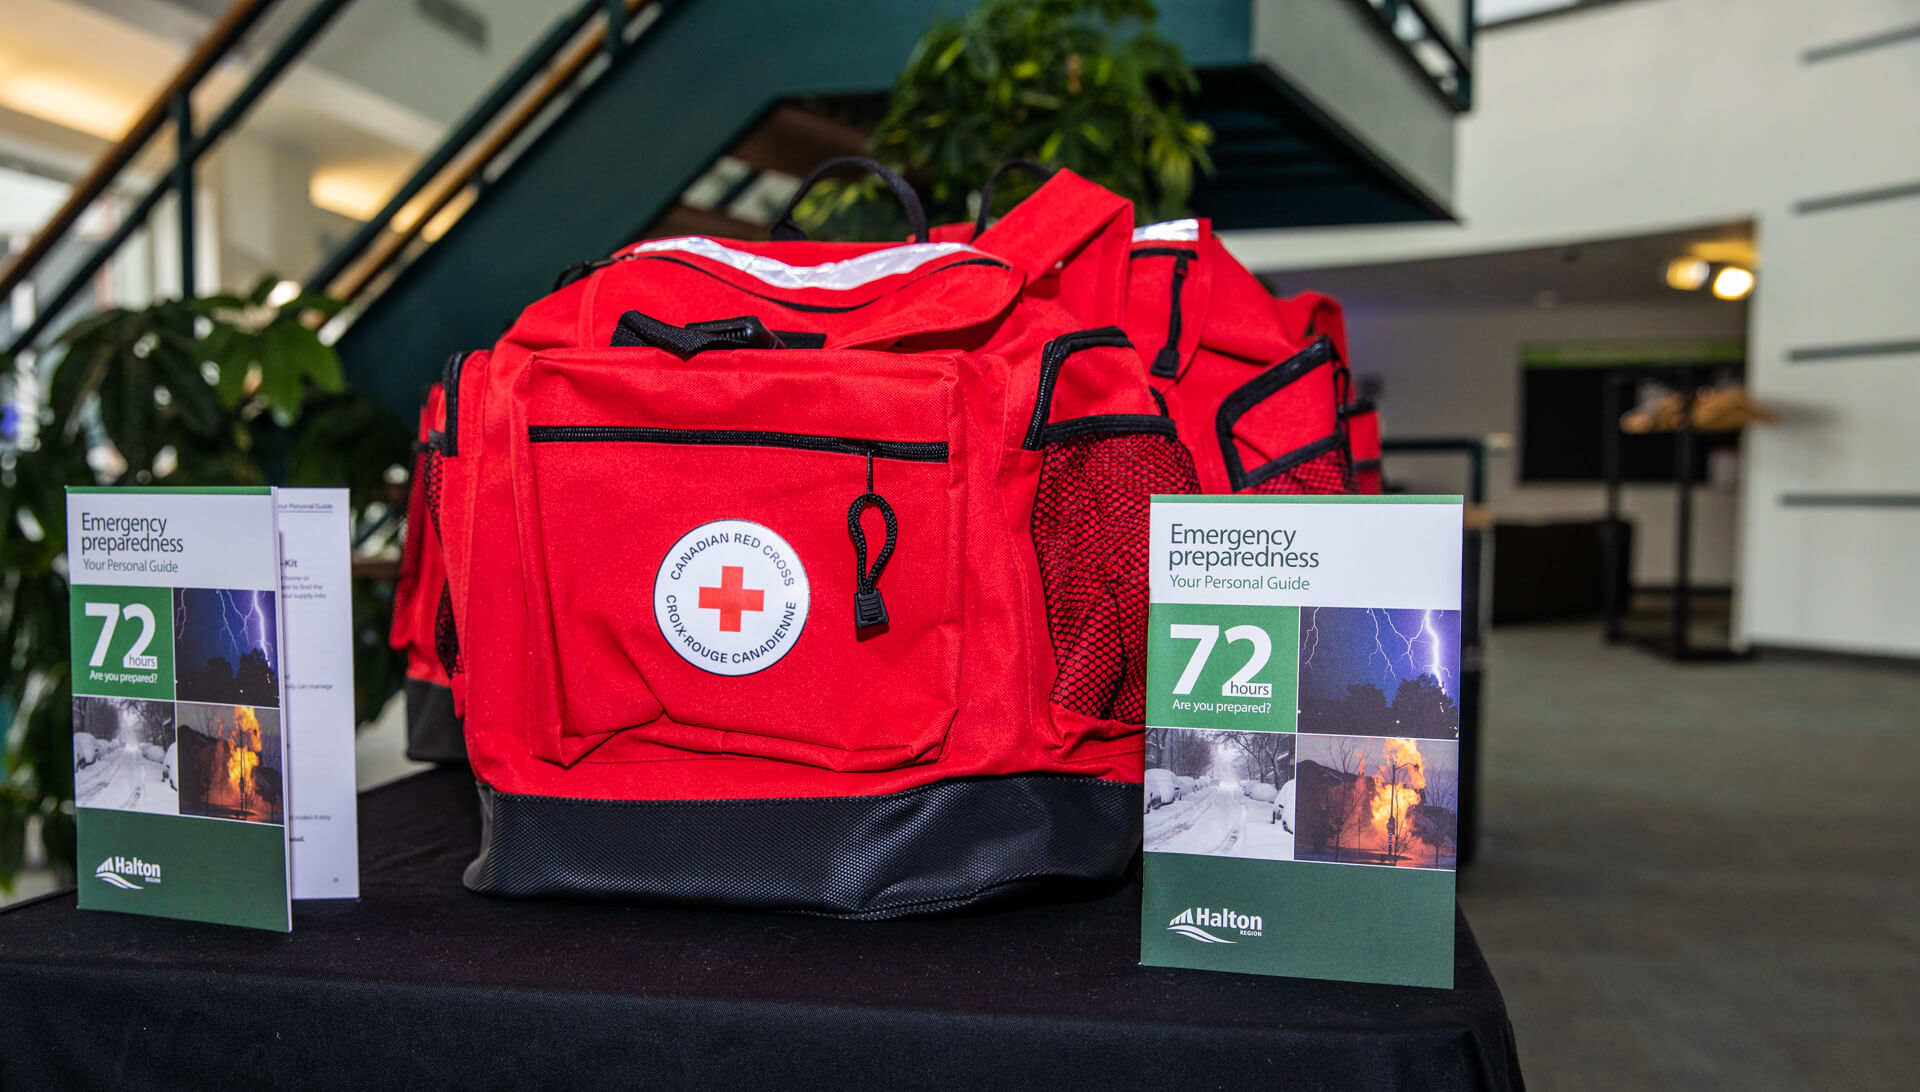 An emergency preparedness kit with the personal emergency preparedness guide.